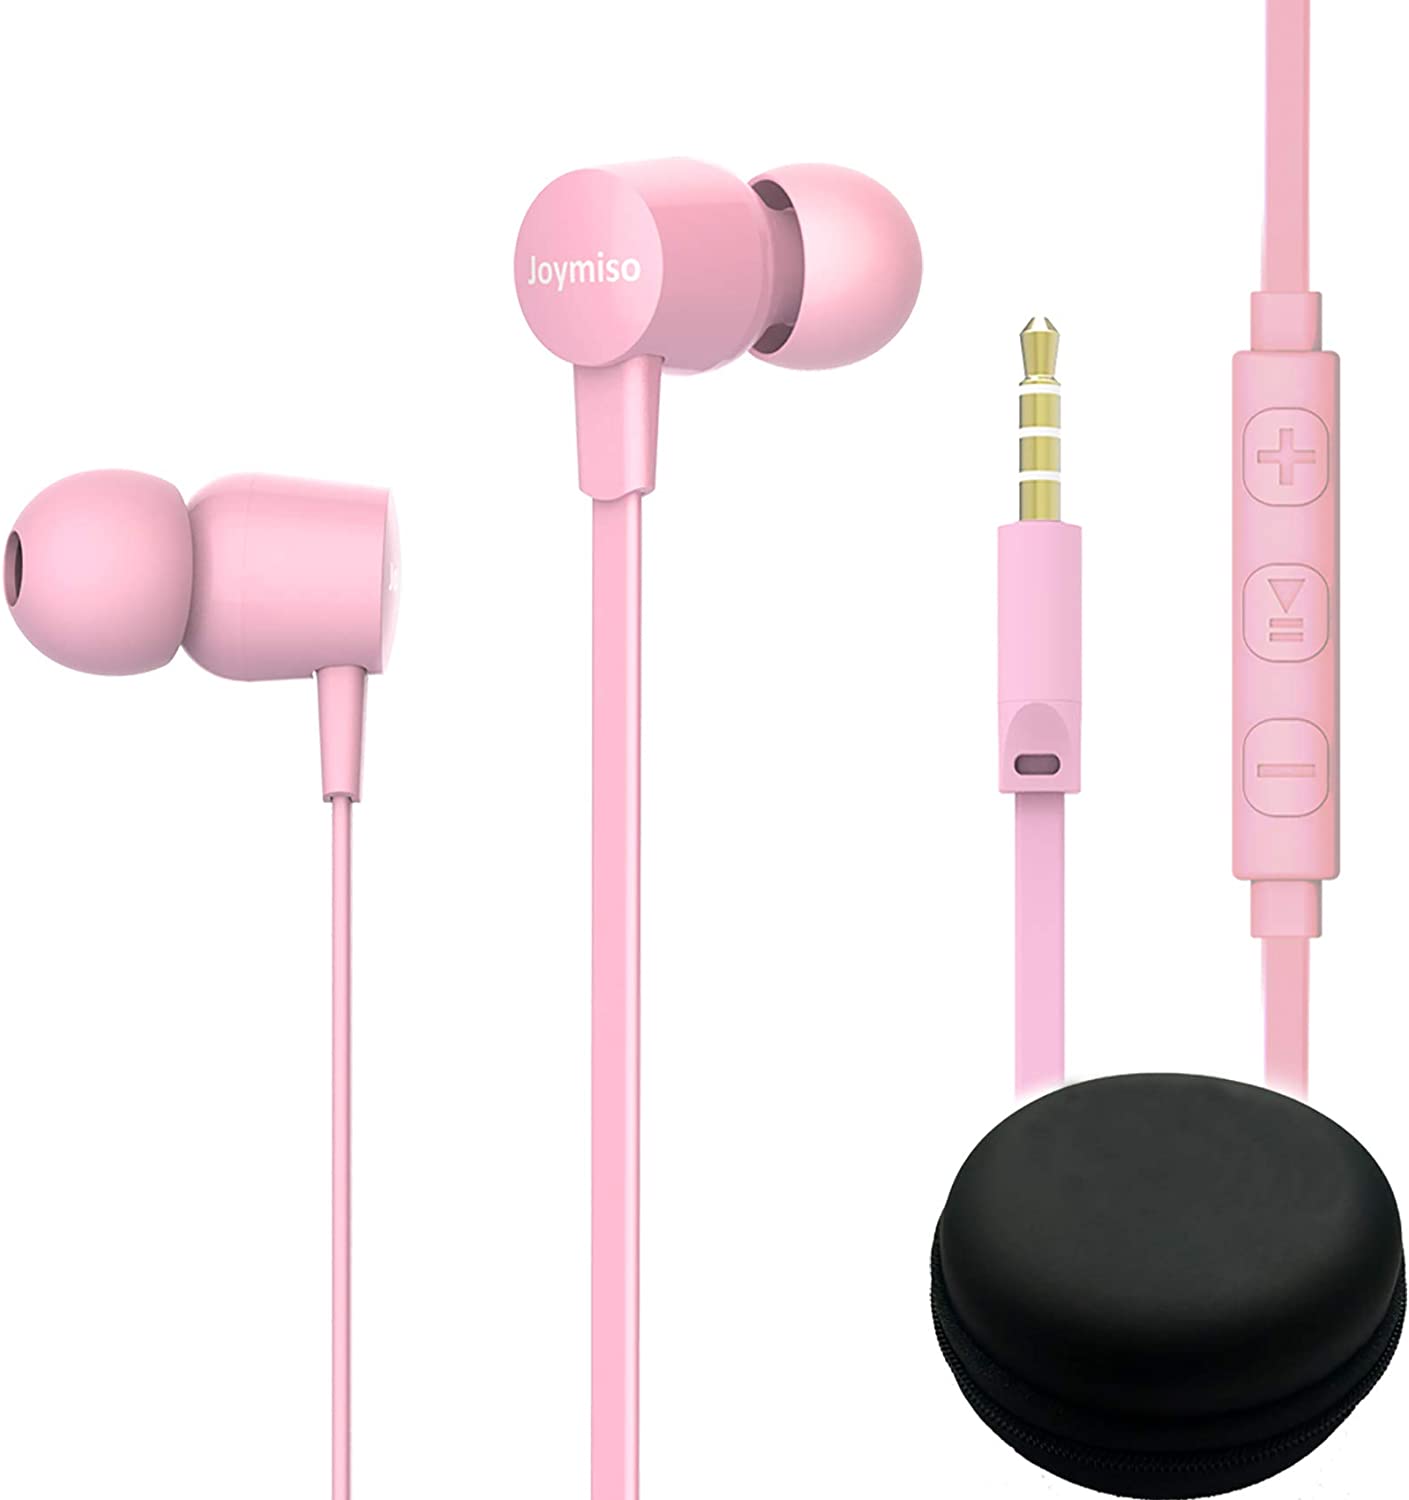 Joymiso Tangle Free Earbuds for Kids Women Small Ears with Case,  Comfortable Lightweight in Ear Headphones, Flat Cable Ear Buds Wired  Earphones with Mic and Volume Control for Cell Phone Laptop (Pink)